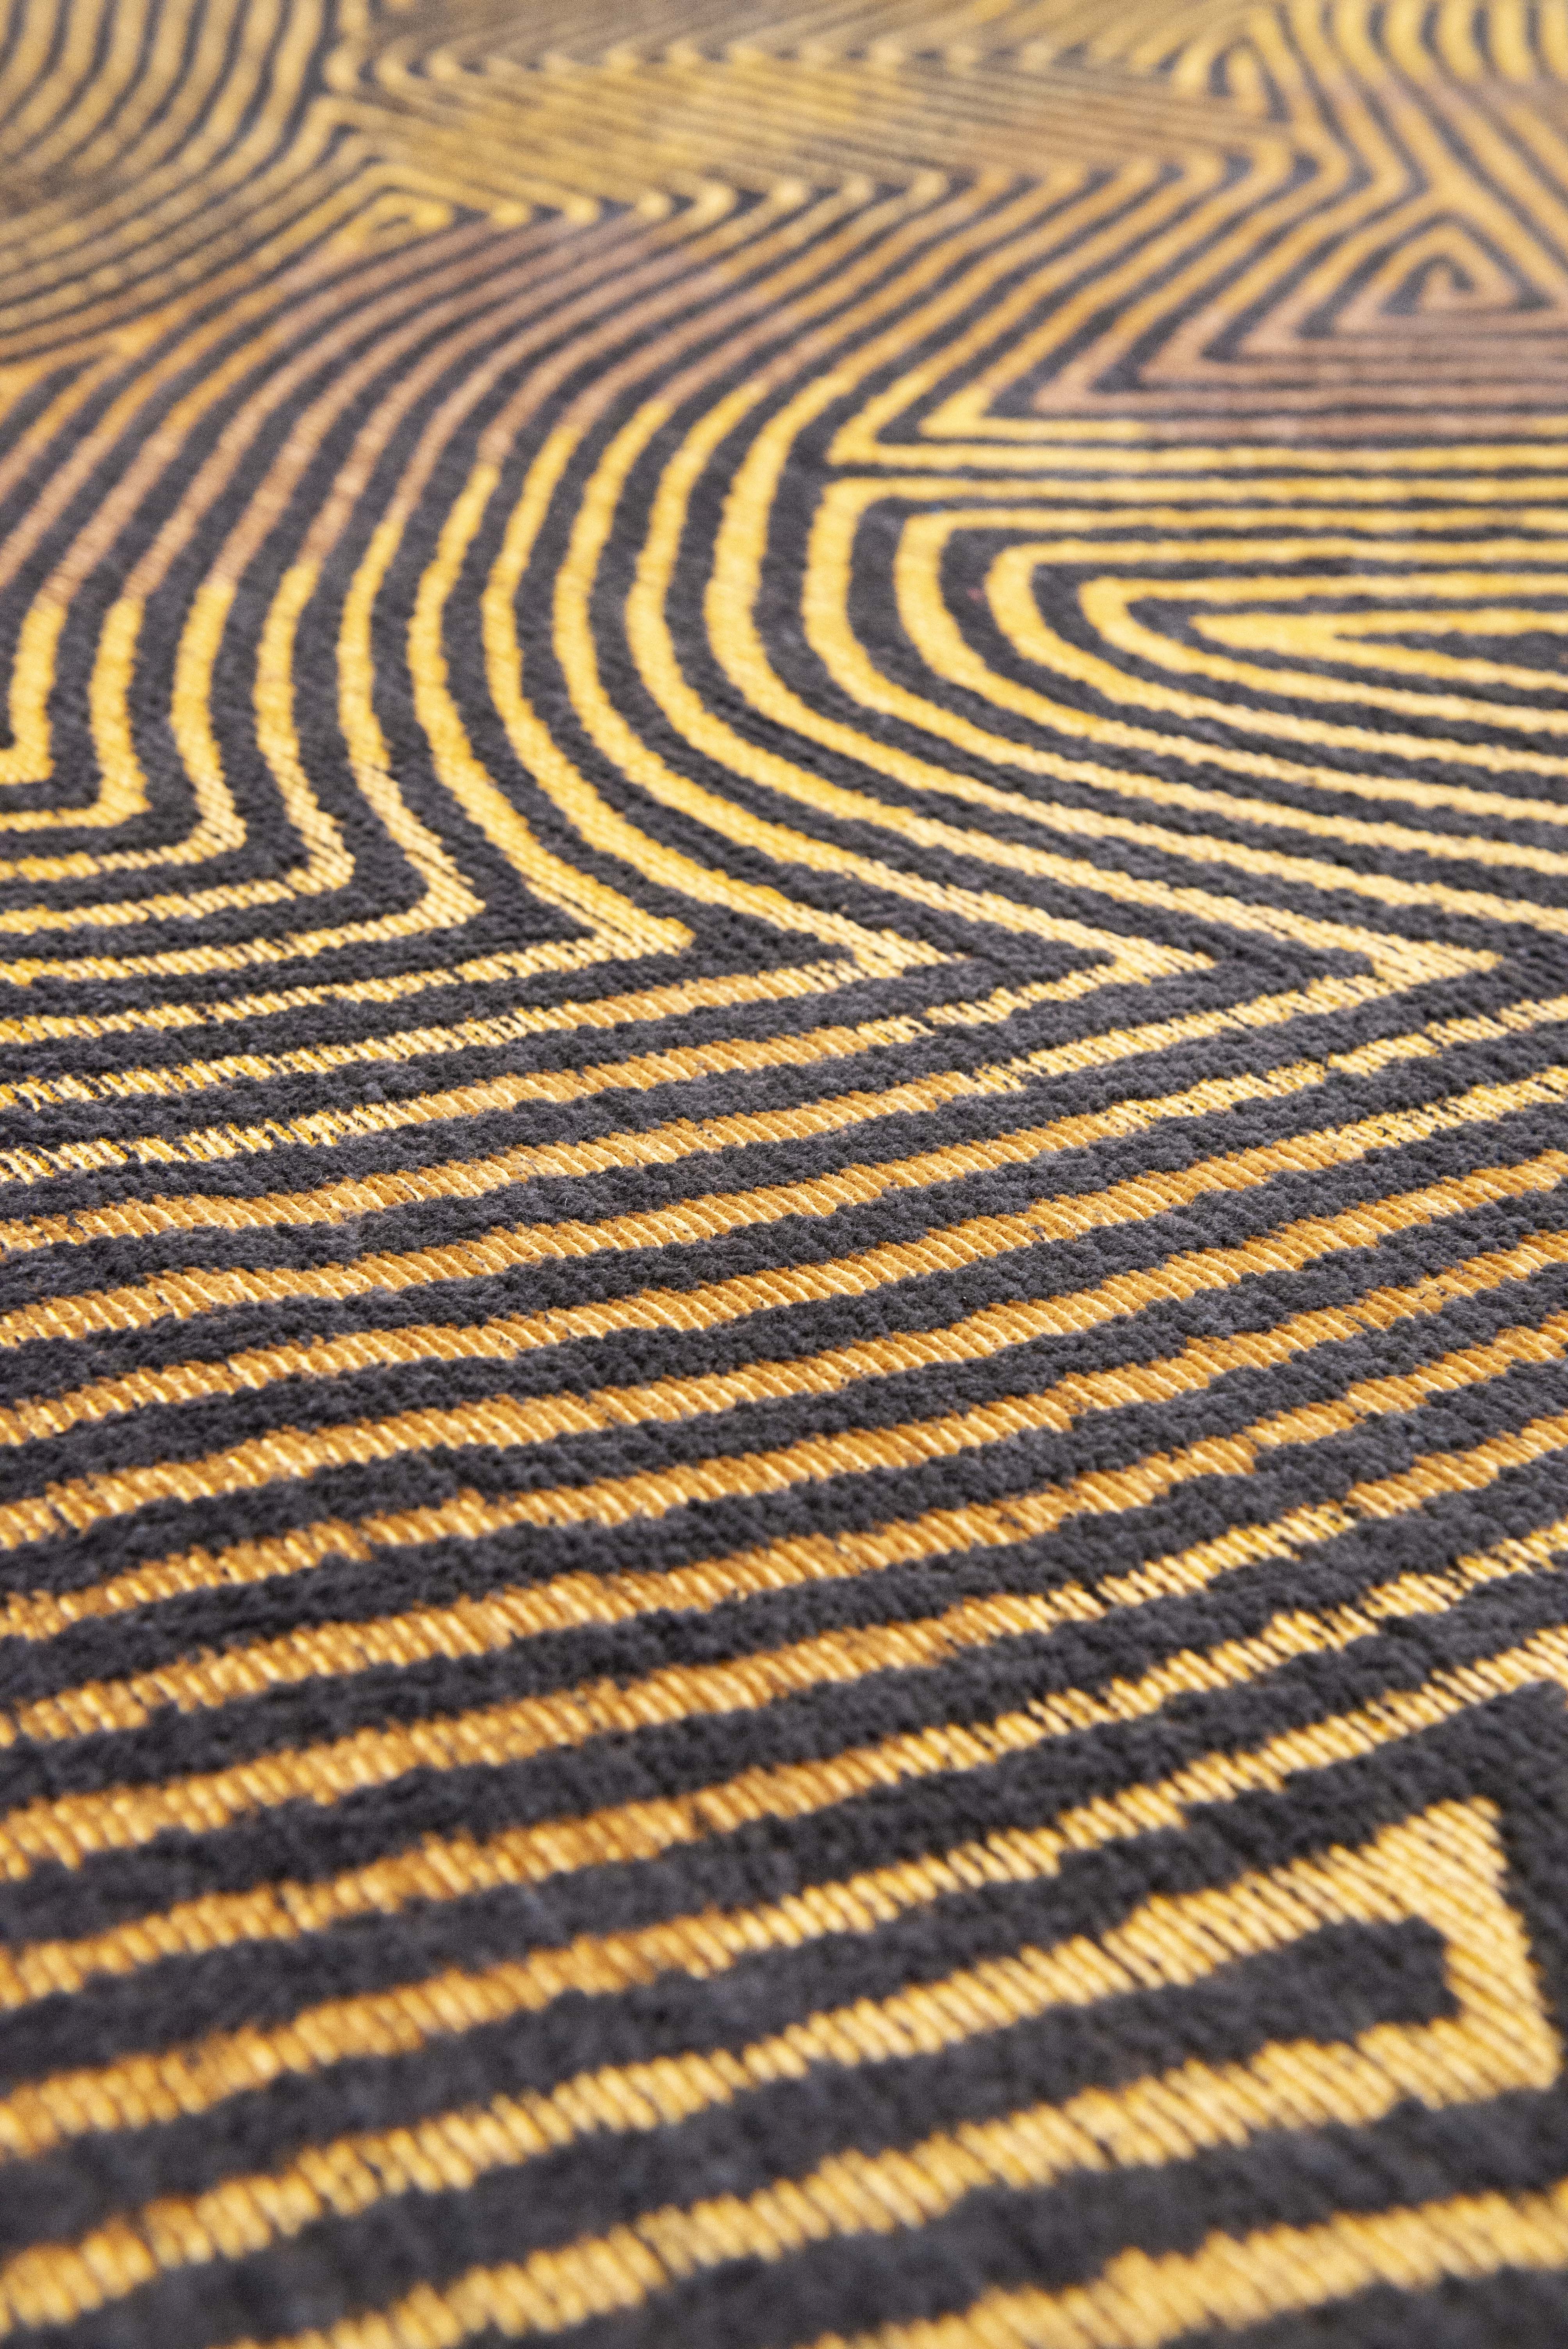 Black and gold flatweave Runner rug with organic, textured pattern